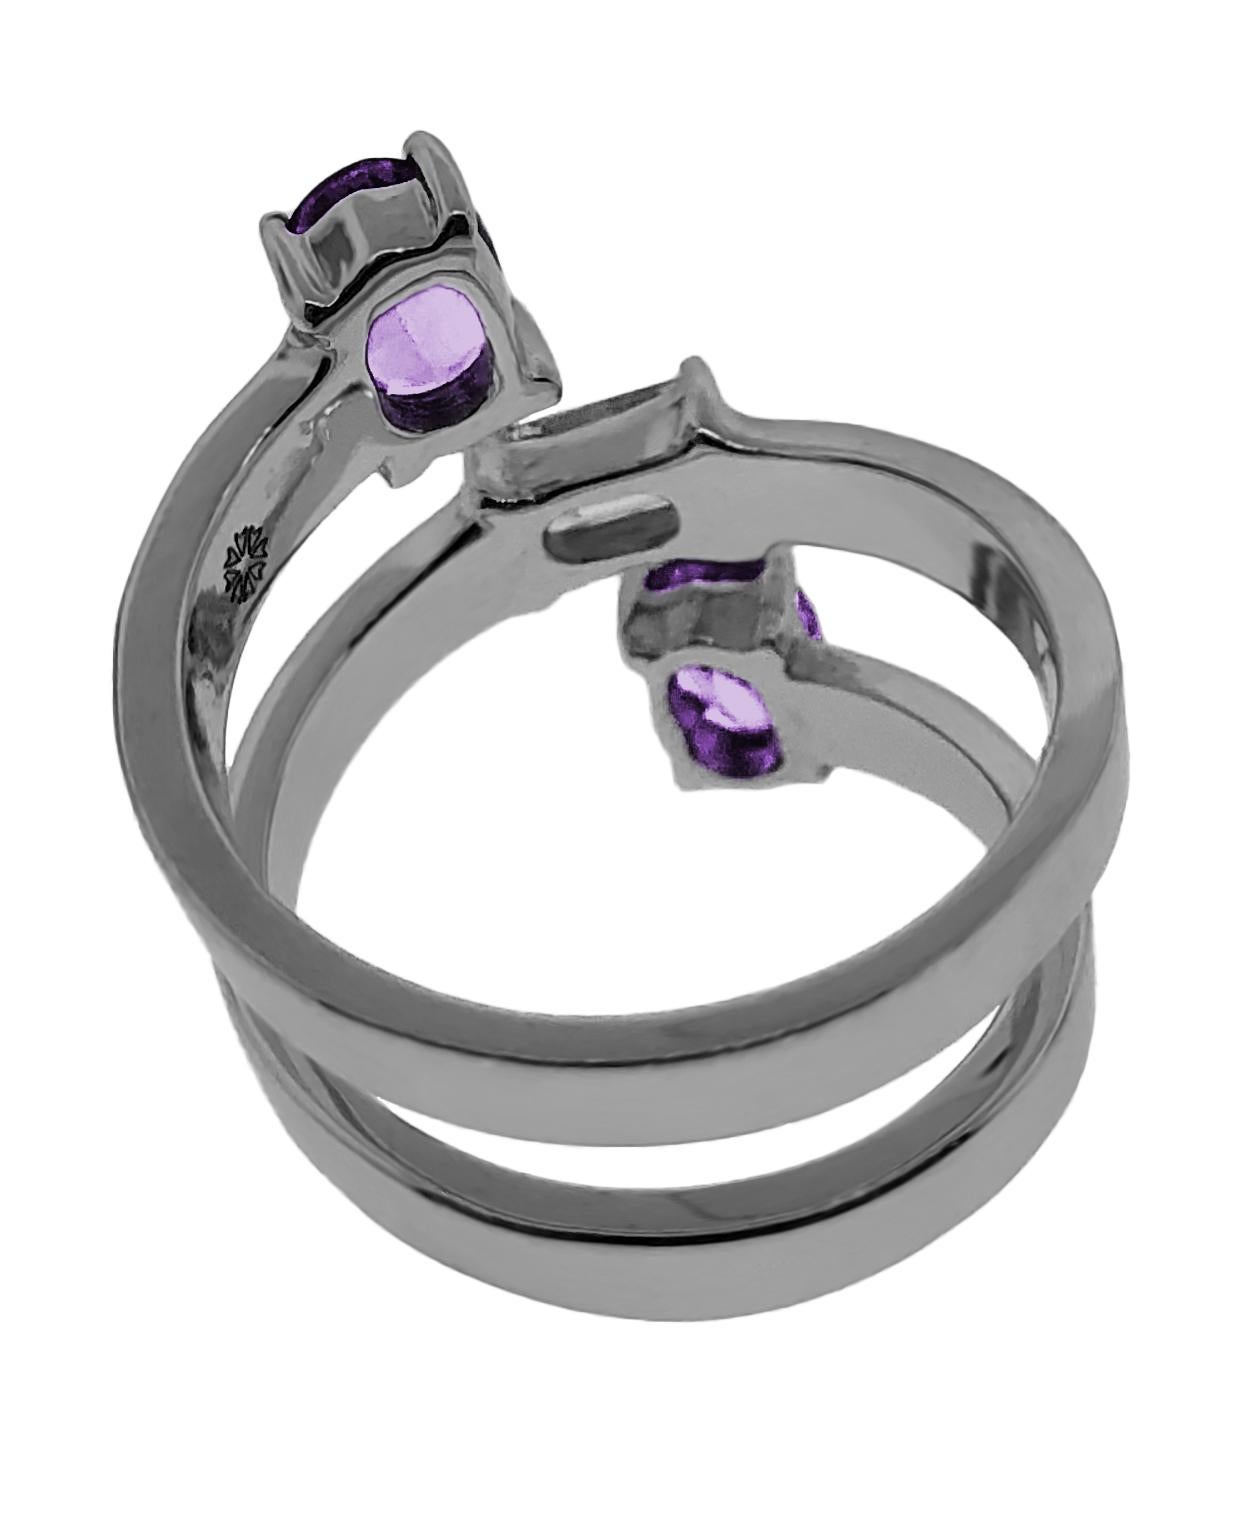 Emerald Cut Drew Pietrafesa White Gold Diamond and Amethyst Snake Ring For Sale